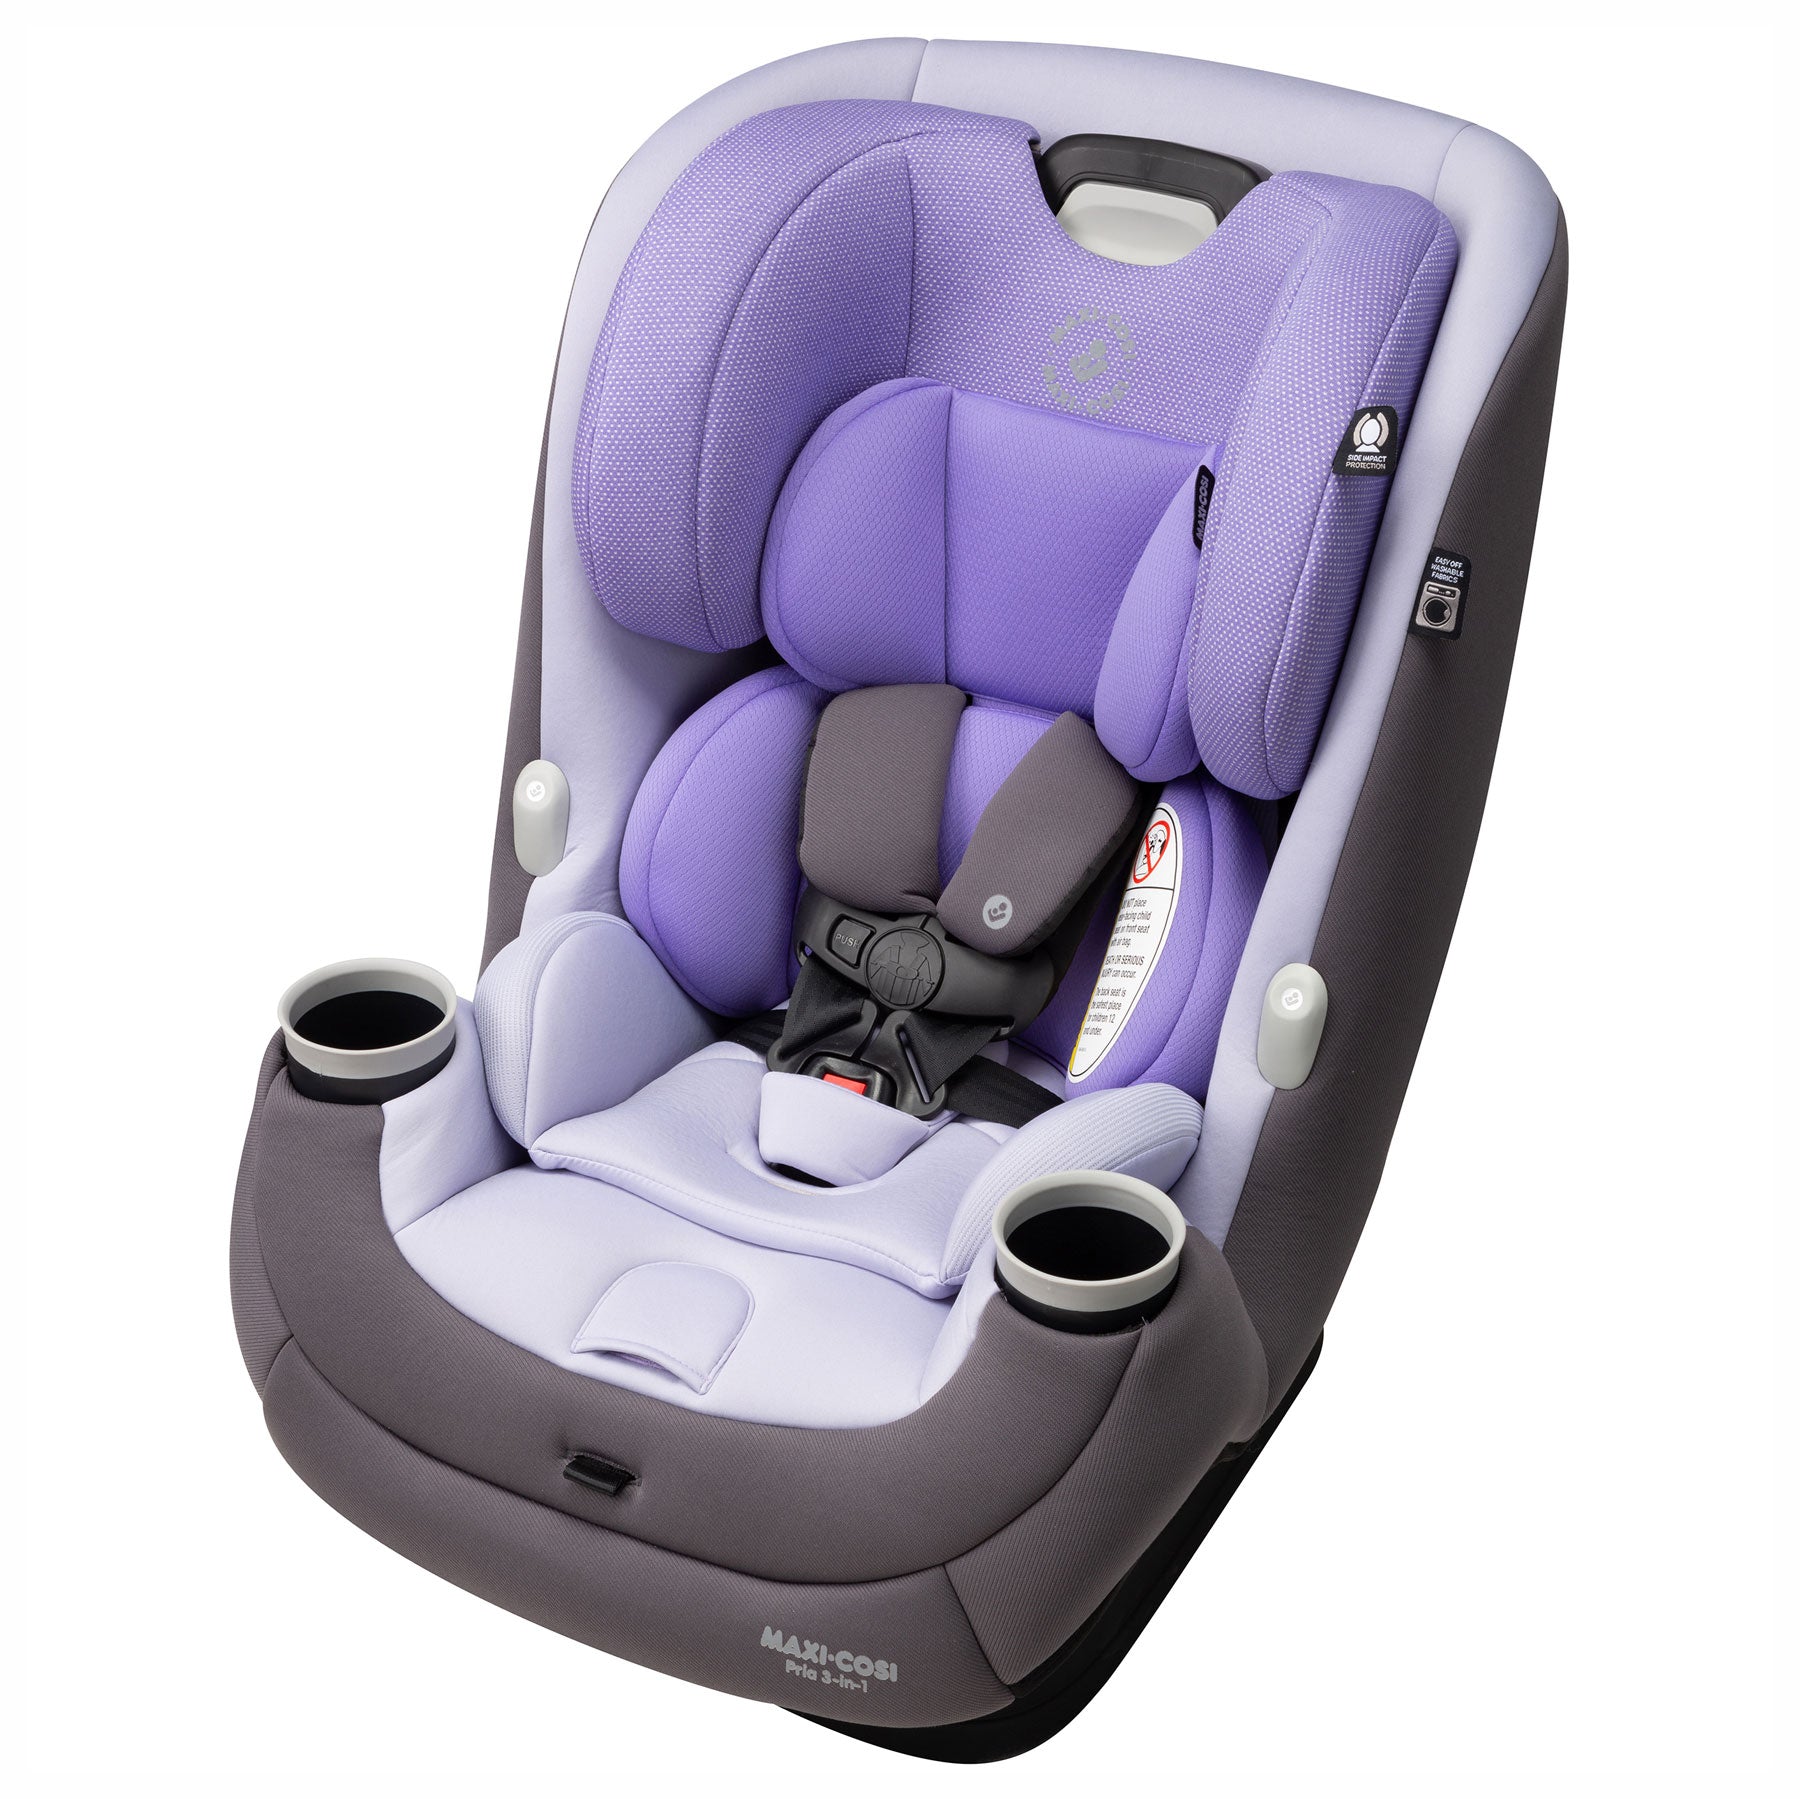 Maxi-Cosi Pria All-in-One Convertible Car Seat - Moonstone Violet